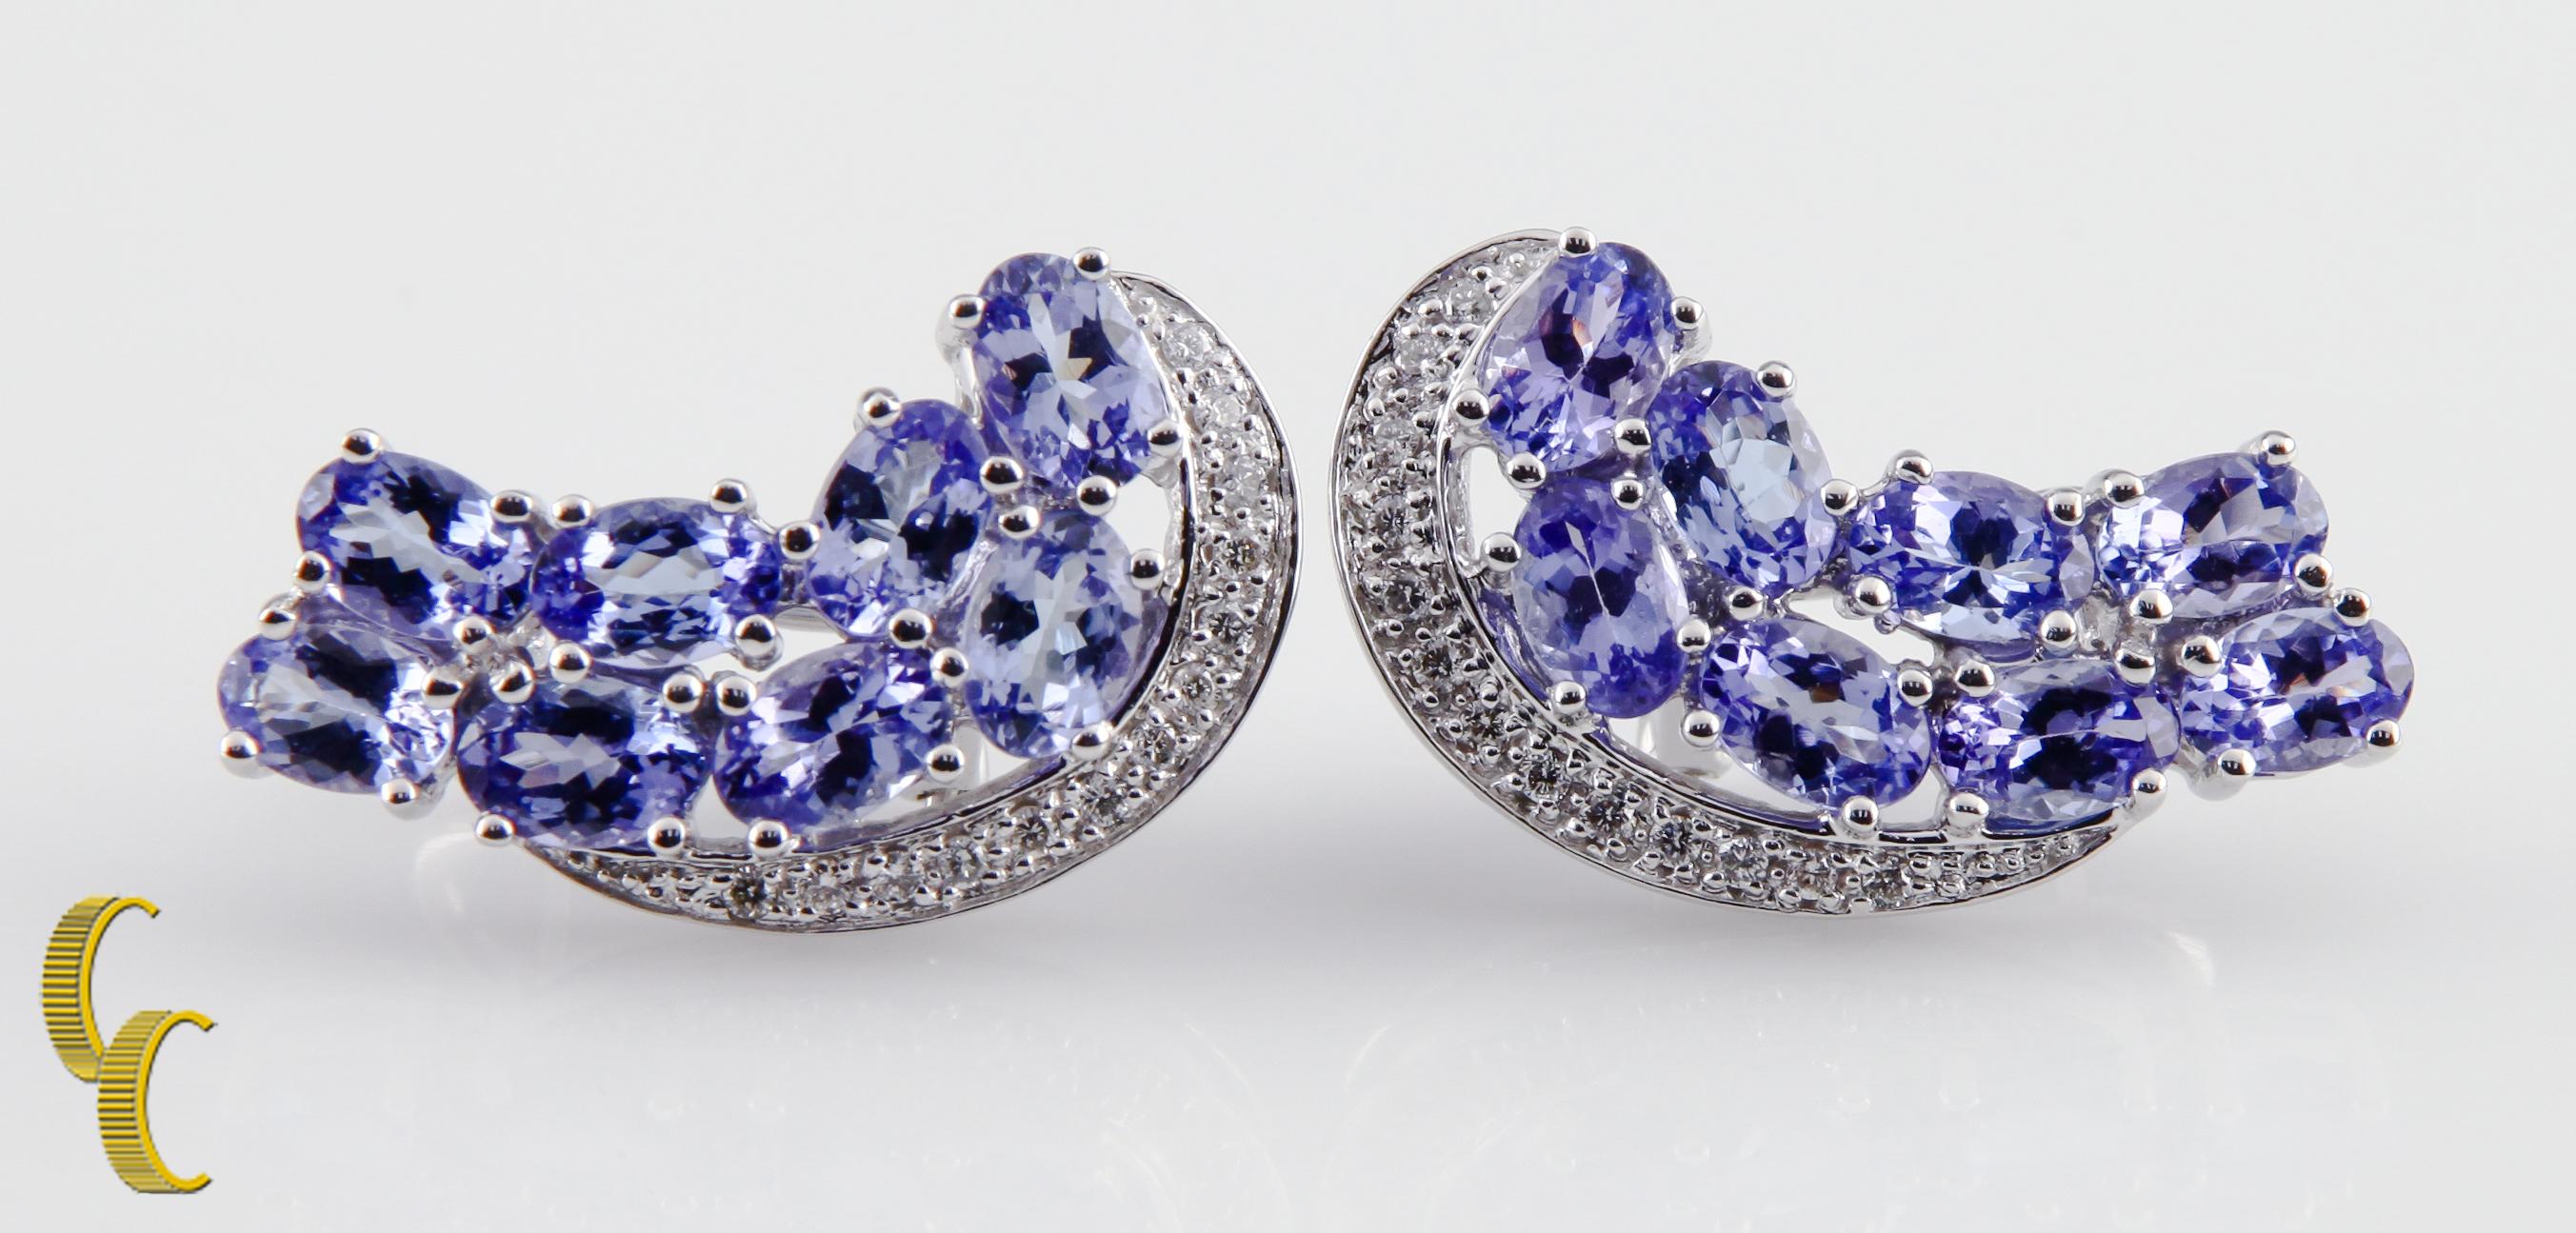 Oval Cut 10.60 Carat Iolite and Diamond 14 Karat White Gold Earring and Ring Jewelry Set For Sale